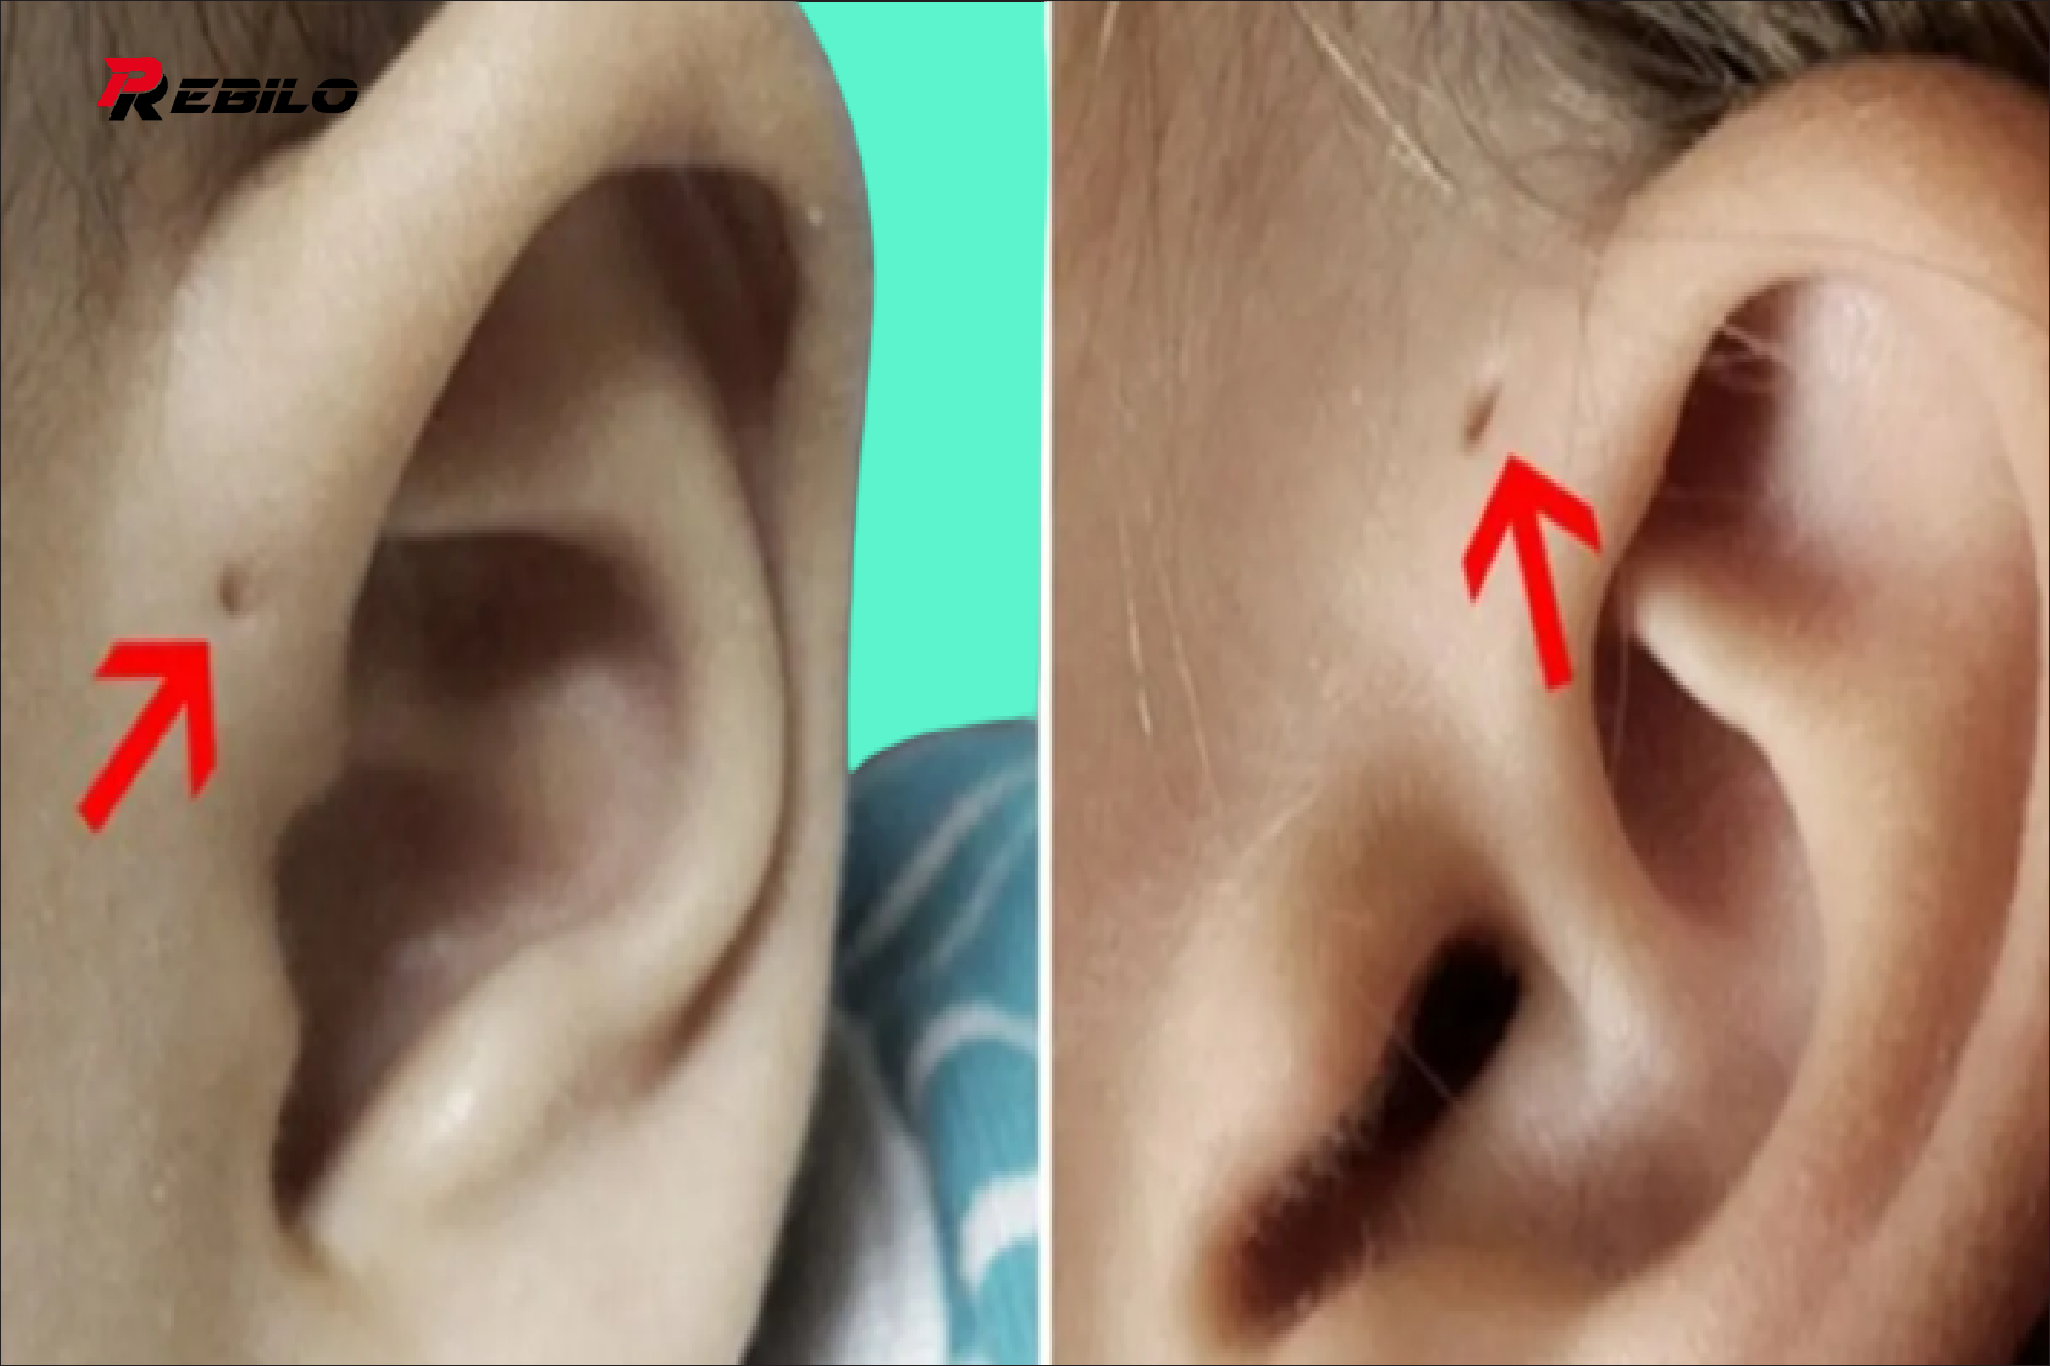 If you have a small hole above your ear, here’s what it means